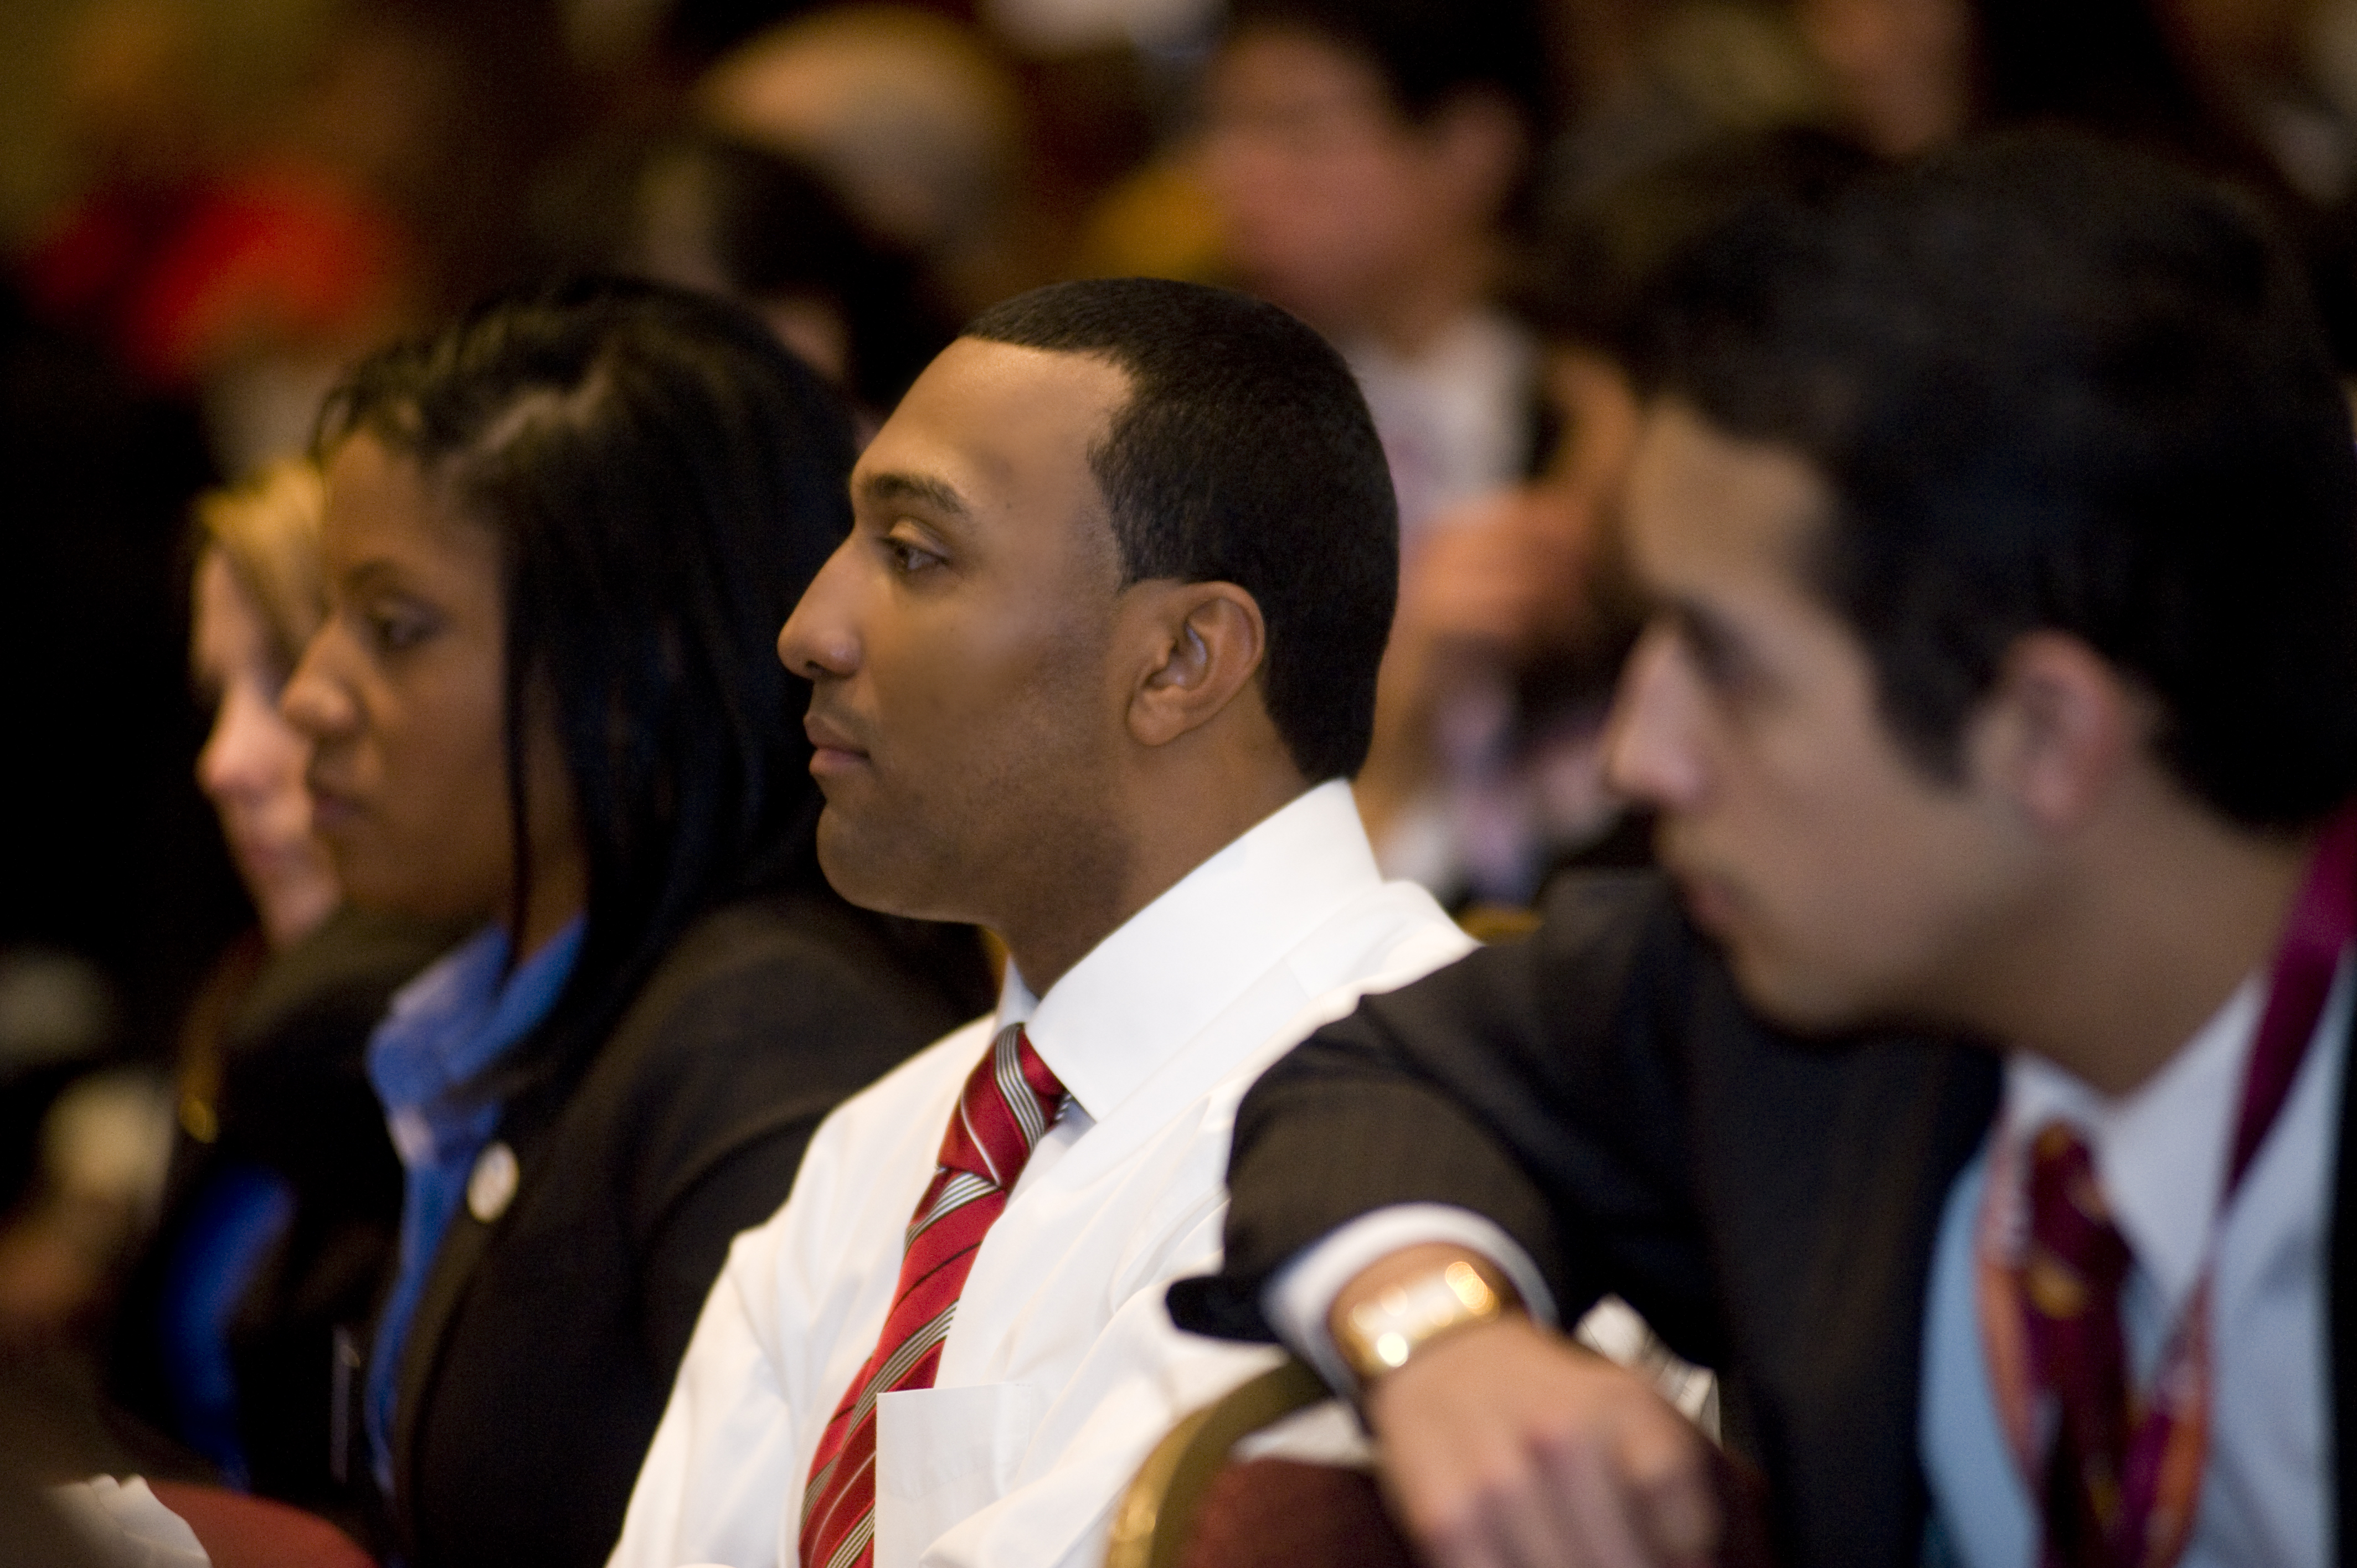 Three participants at a diversity conference